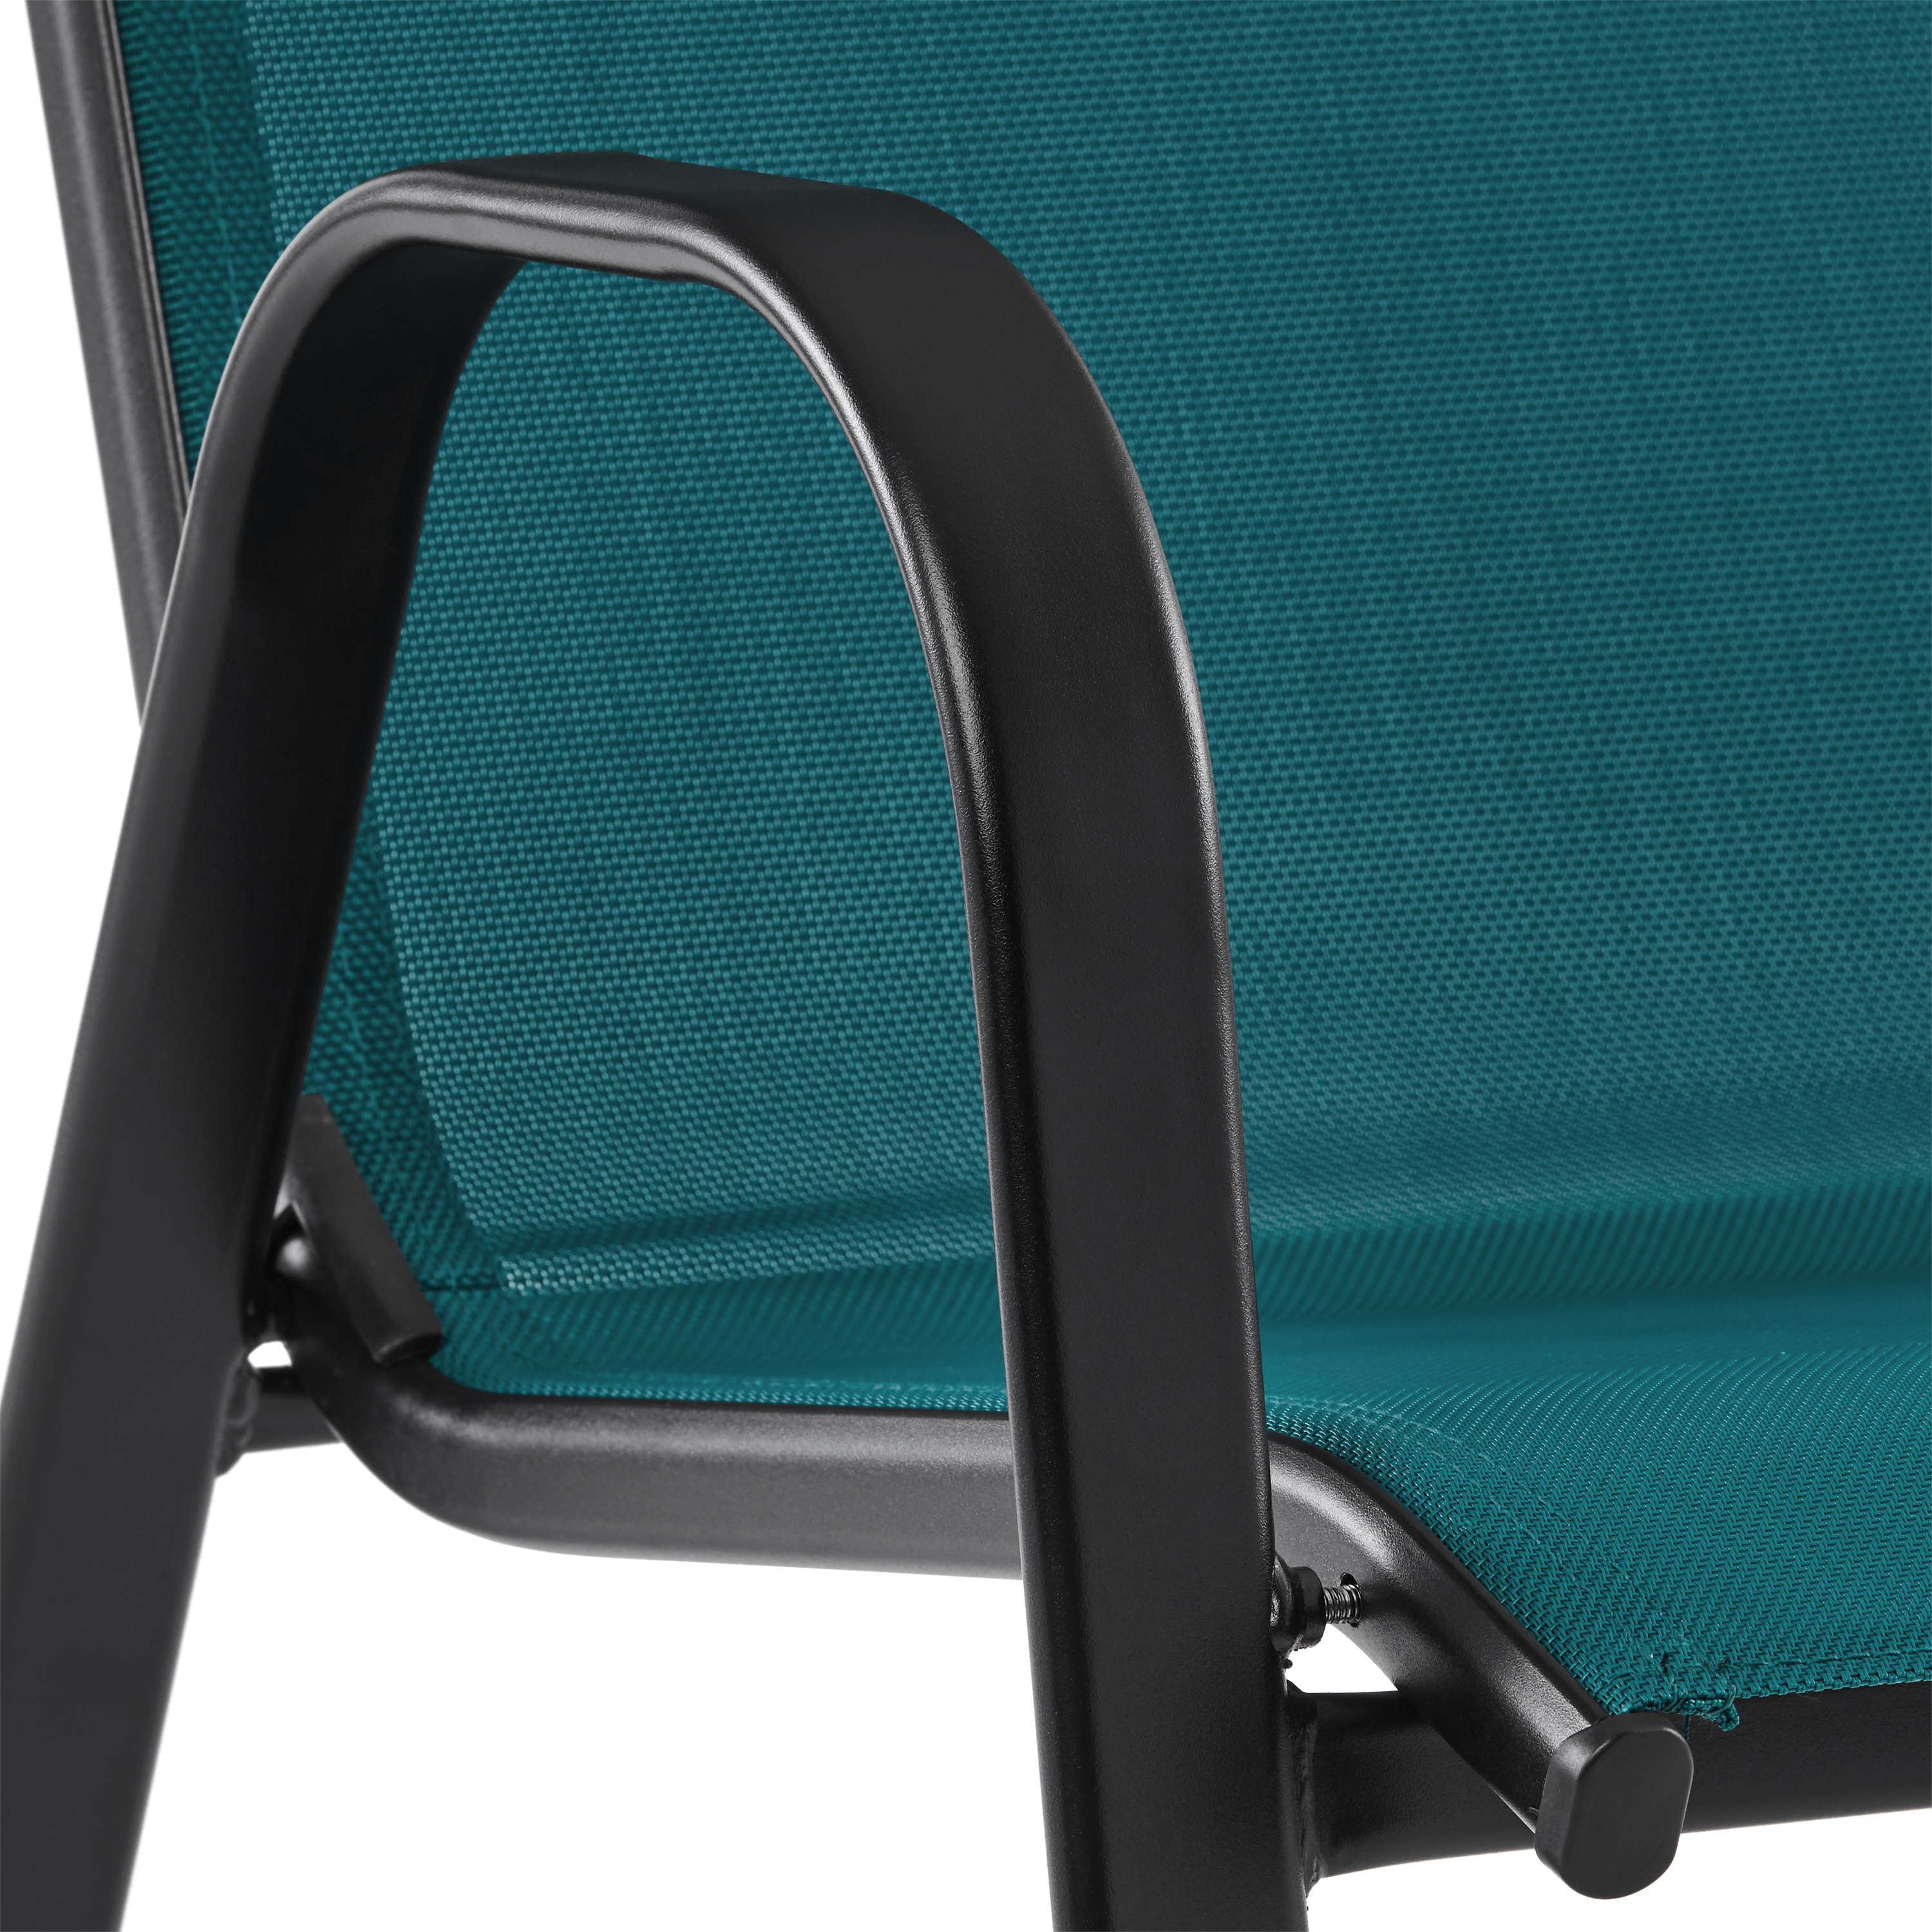 Mainstays Heritage Park Steel Stacking Chair, Teal - image 4 of 9